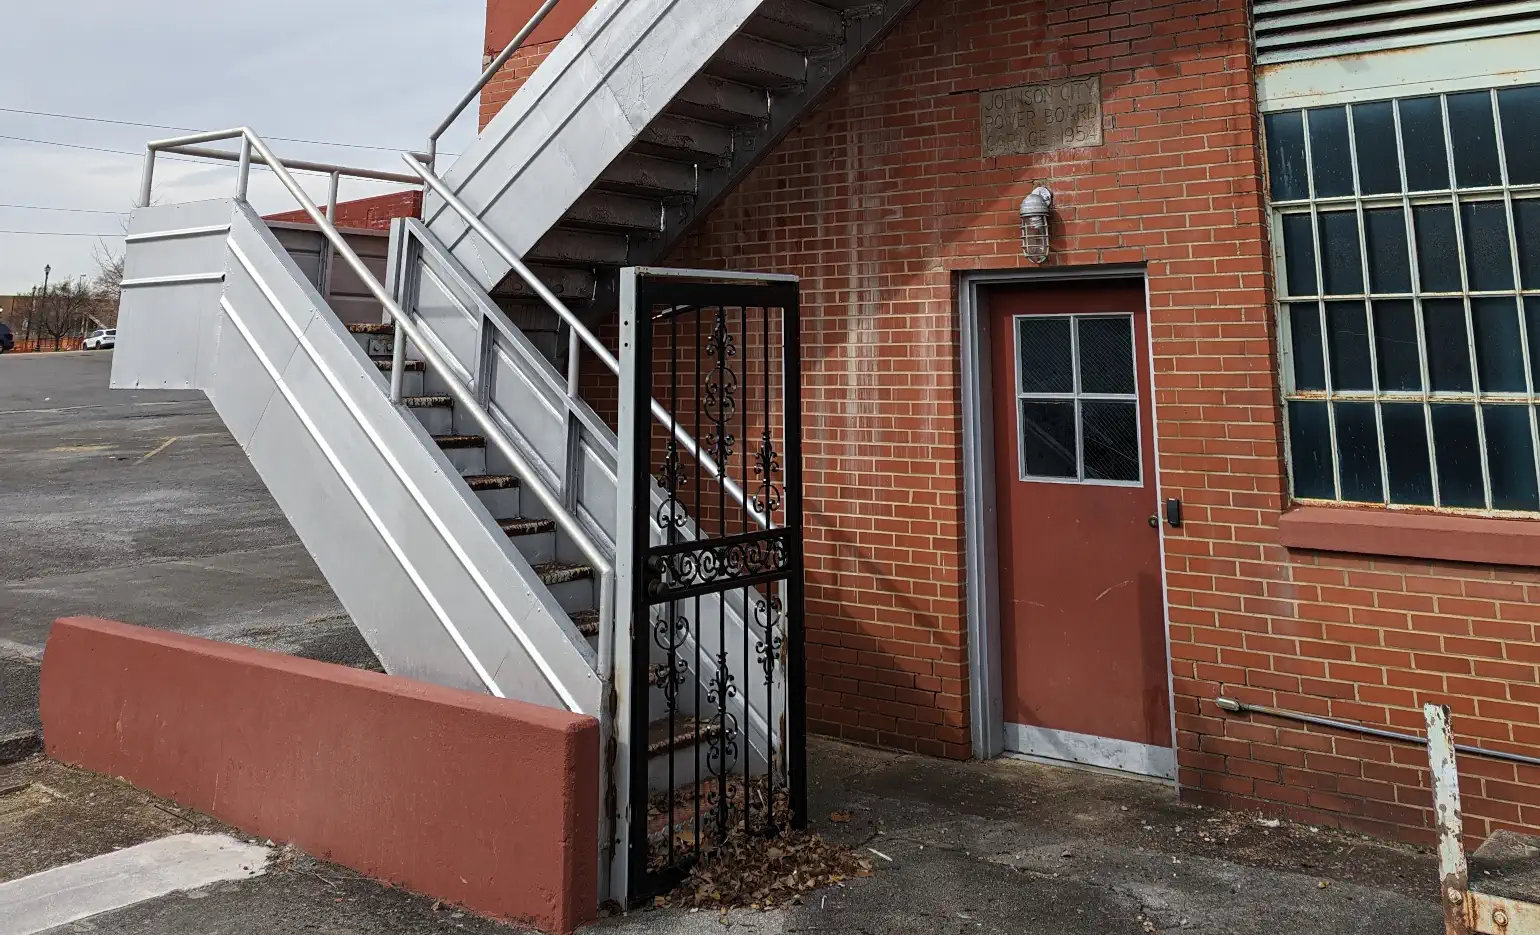 Photograph of brick building fronted by a metal staircase leading to the roof, gated by a full-size metal door that would be trivially easy to climb around